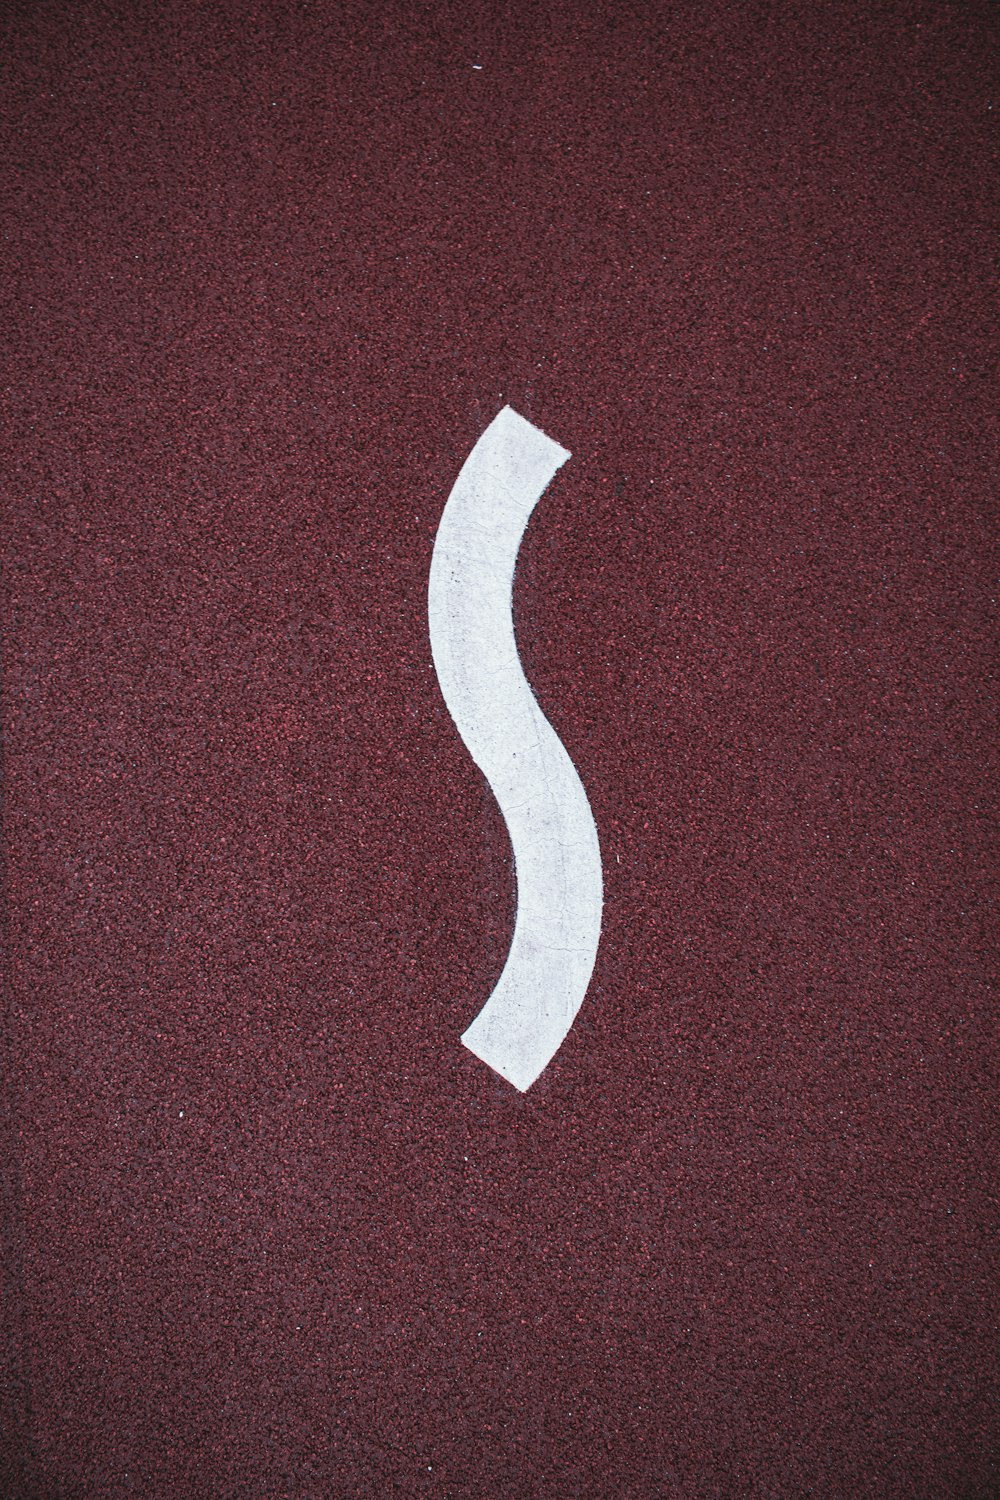 a picture of a white letter s on a red surface